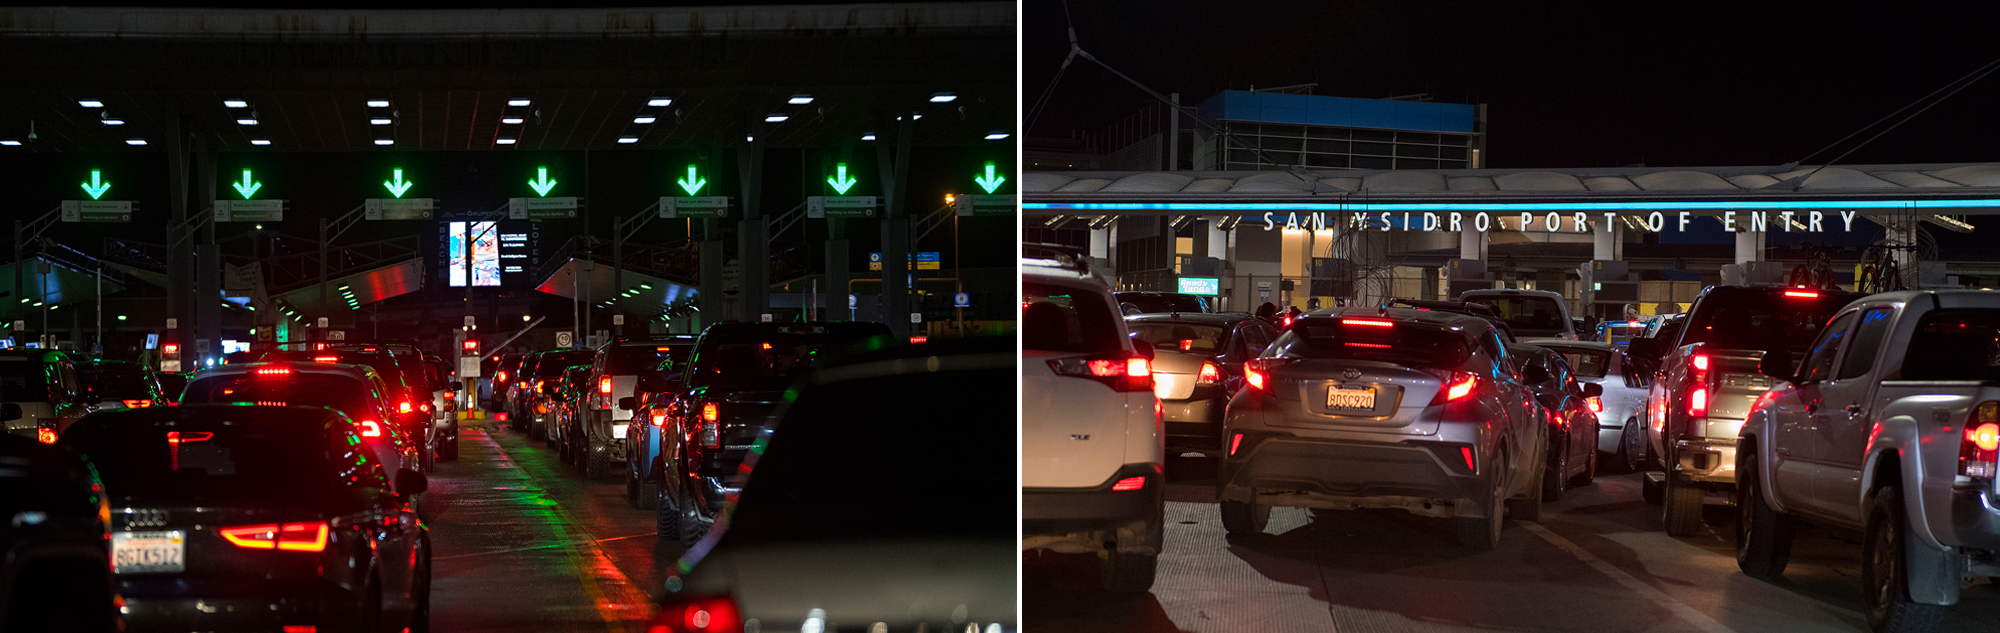 Motorists line up to cross the border into Mexico from California the night before Thanksgiving. At right, the lines on the Mexico side of the border are just as long on Nov. 27. Images by Amanda Cowan. United States / Mexico, 2019.